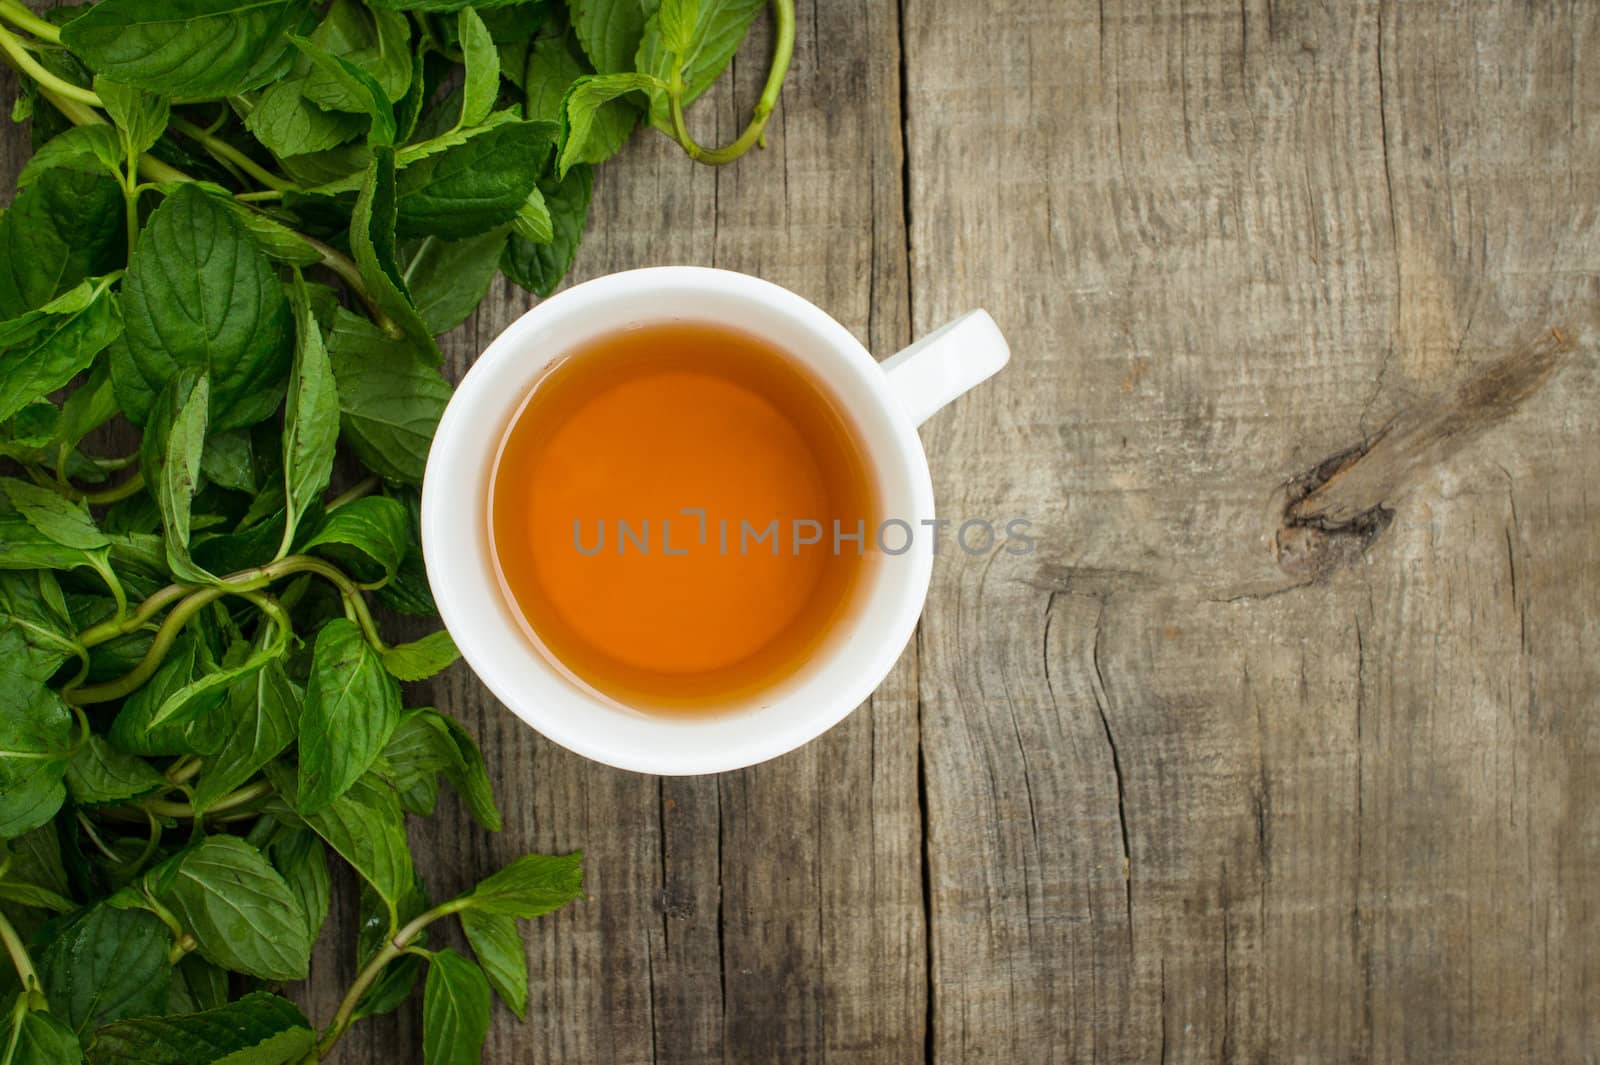 A cup of mint tea on wood textured background